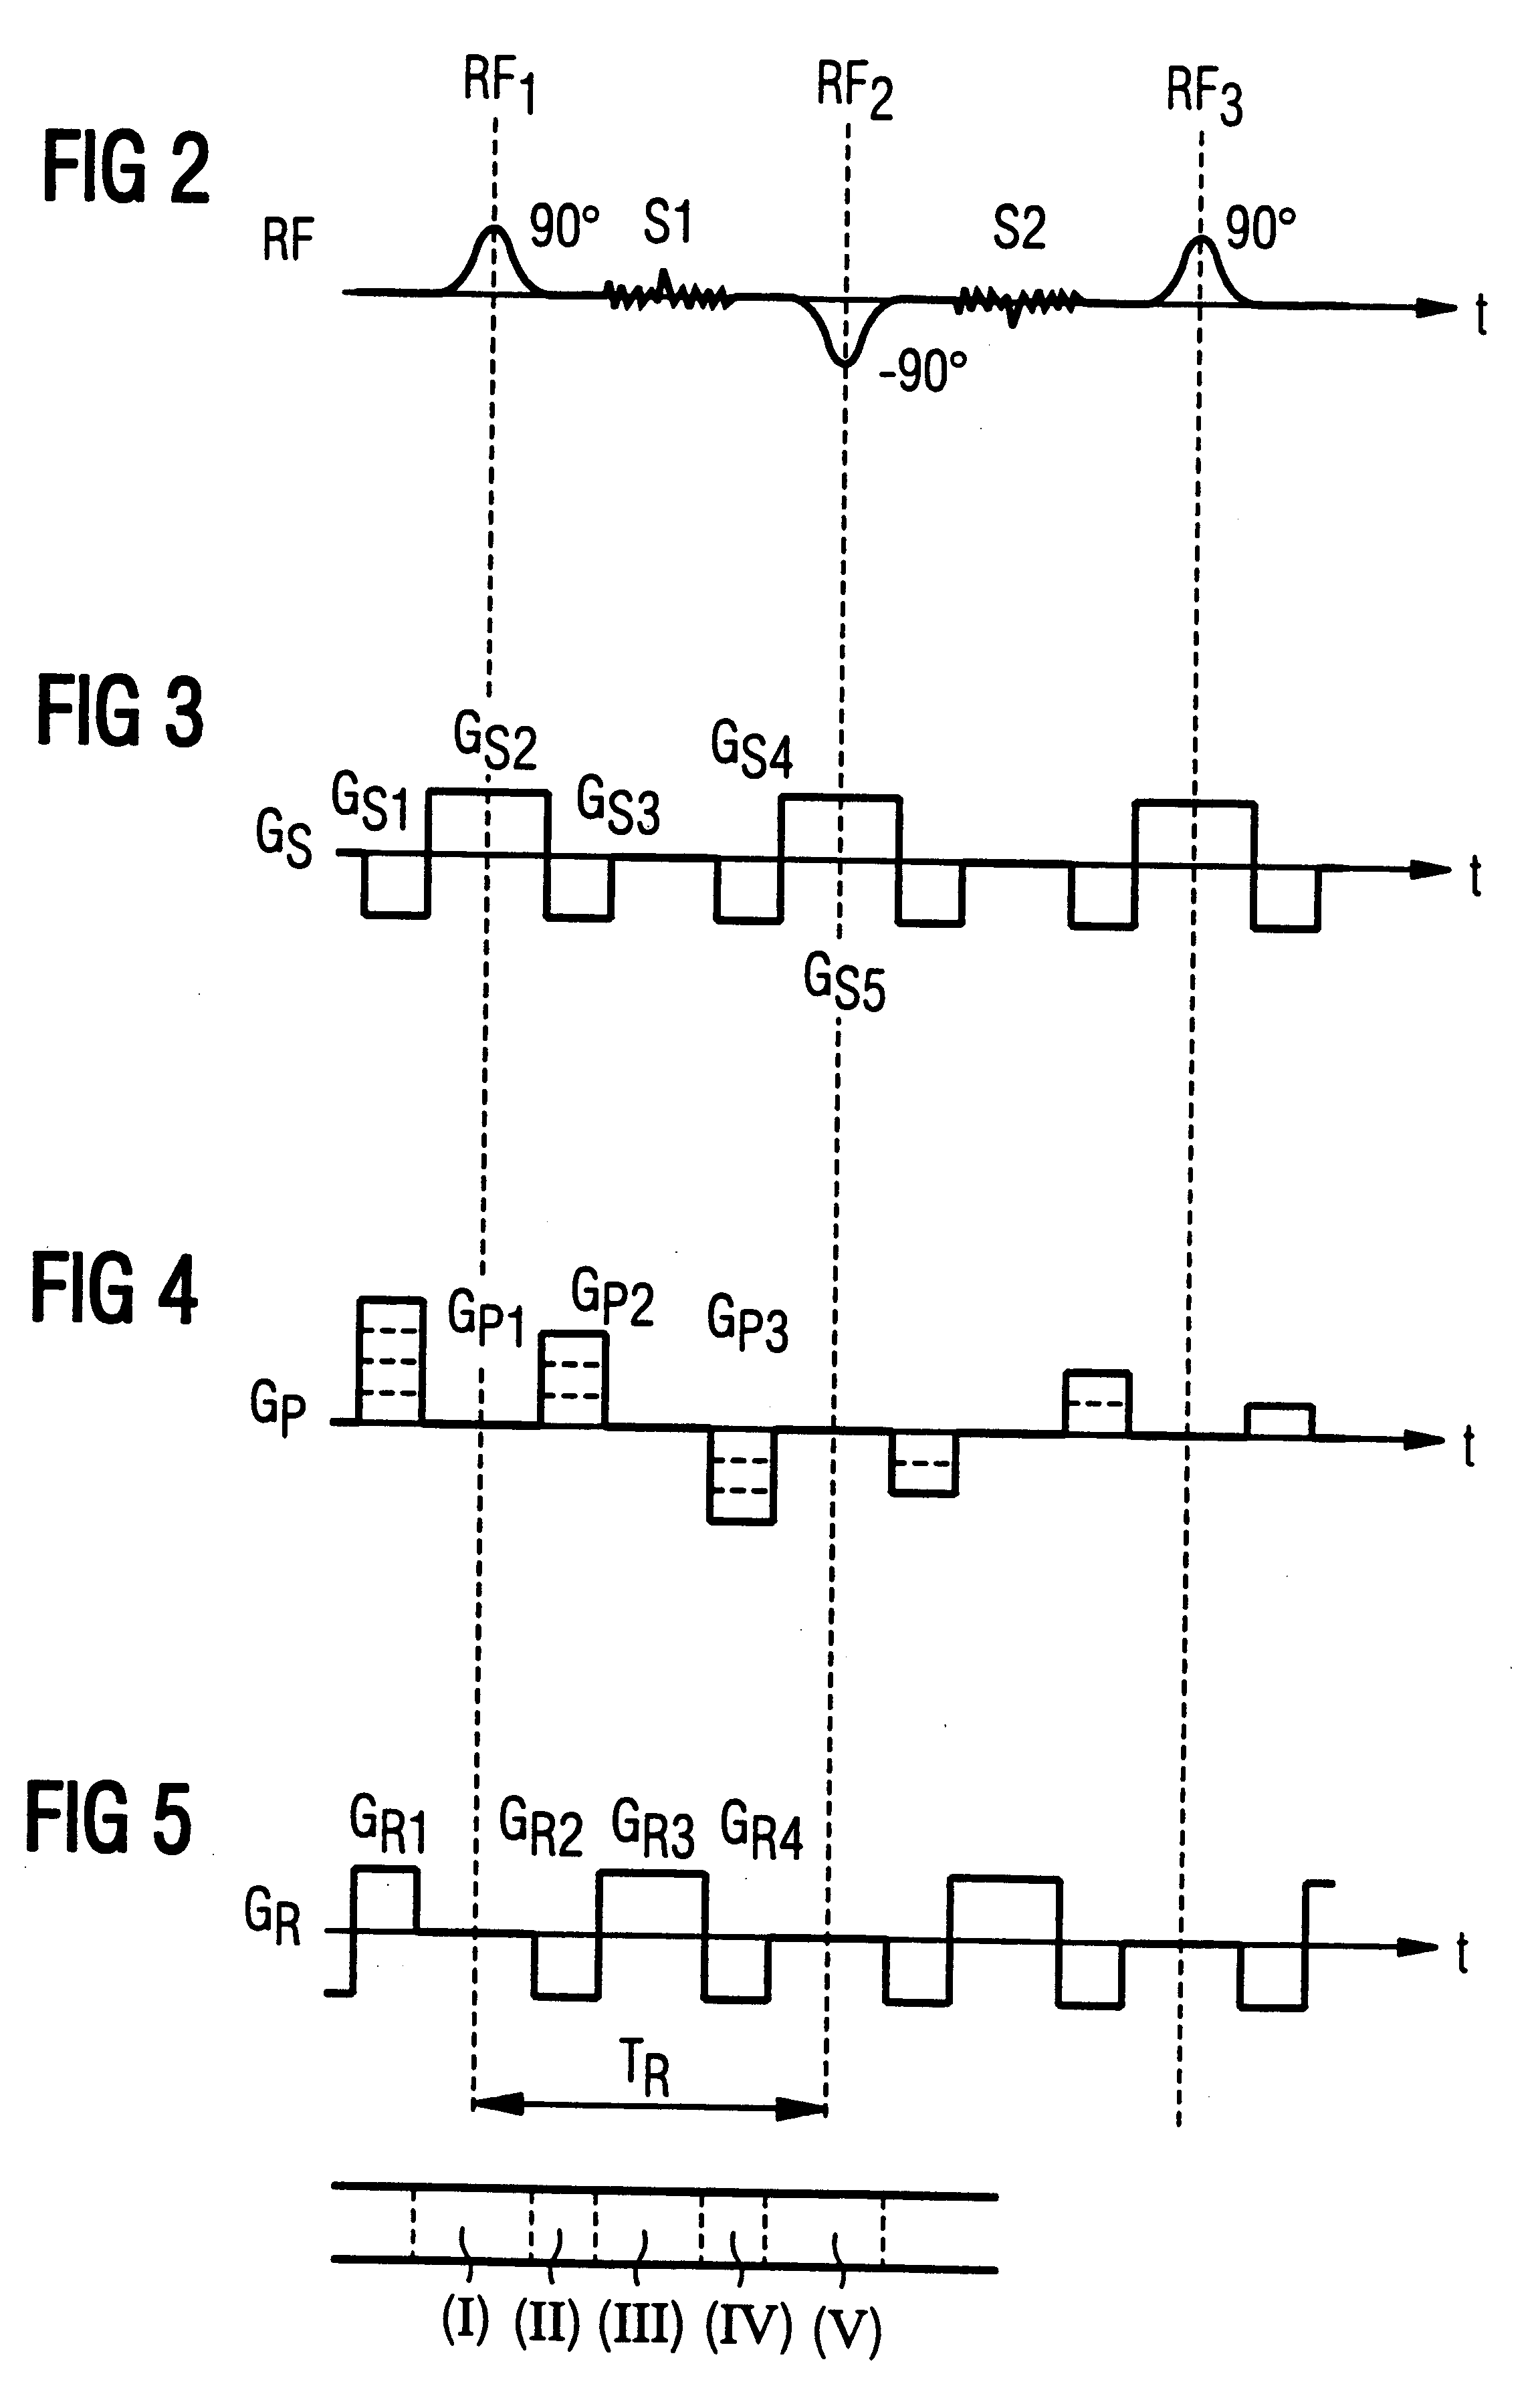 Magnetic resonance tomography apparatus and operating method allowing multiple scans in rapid succession